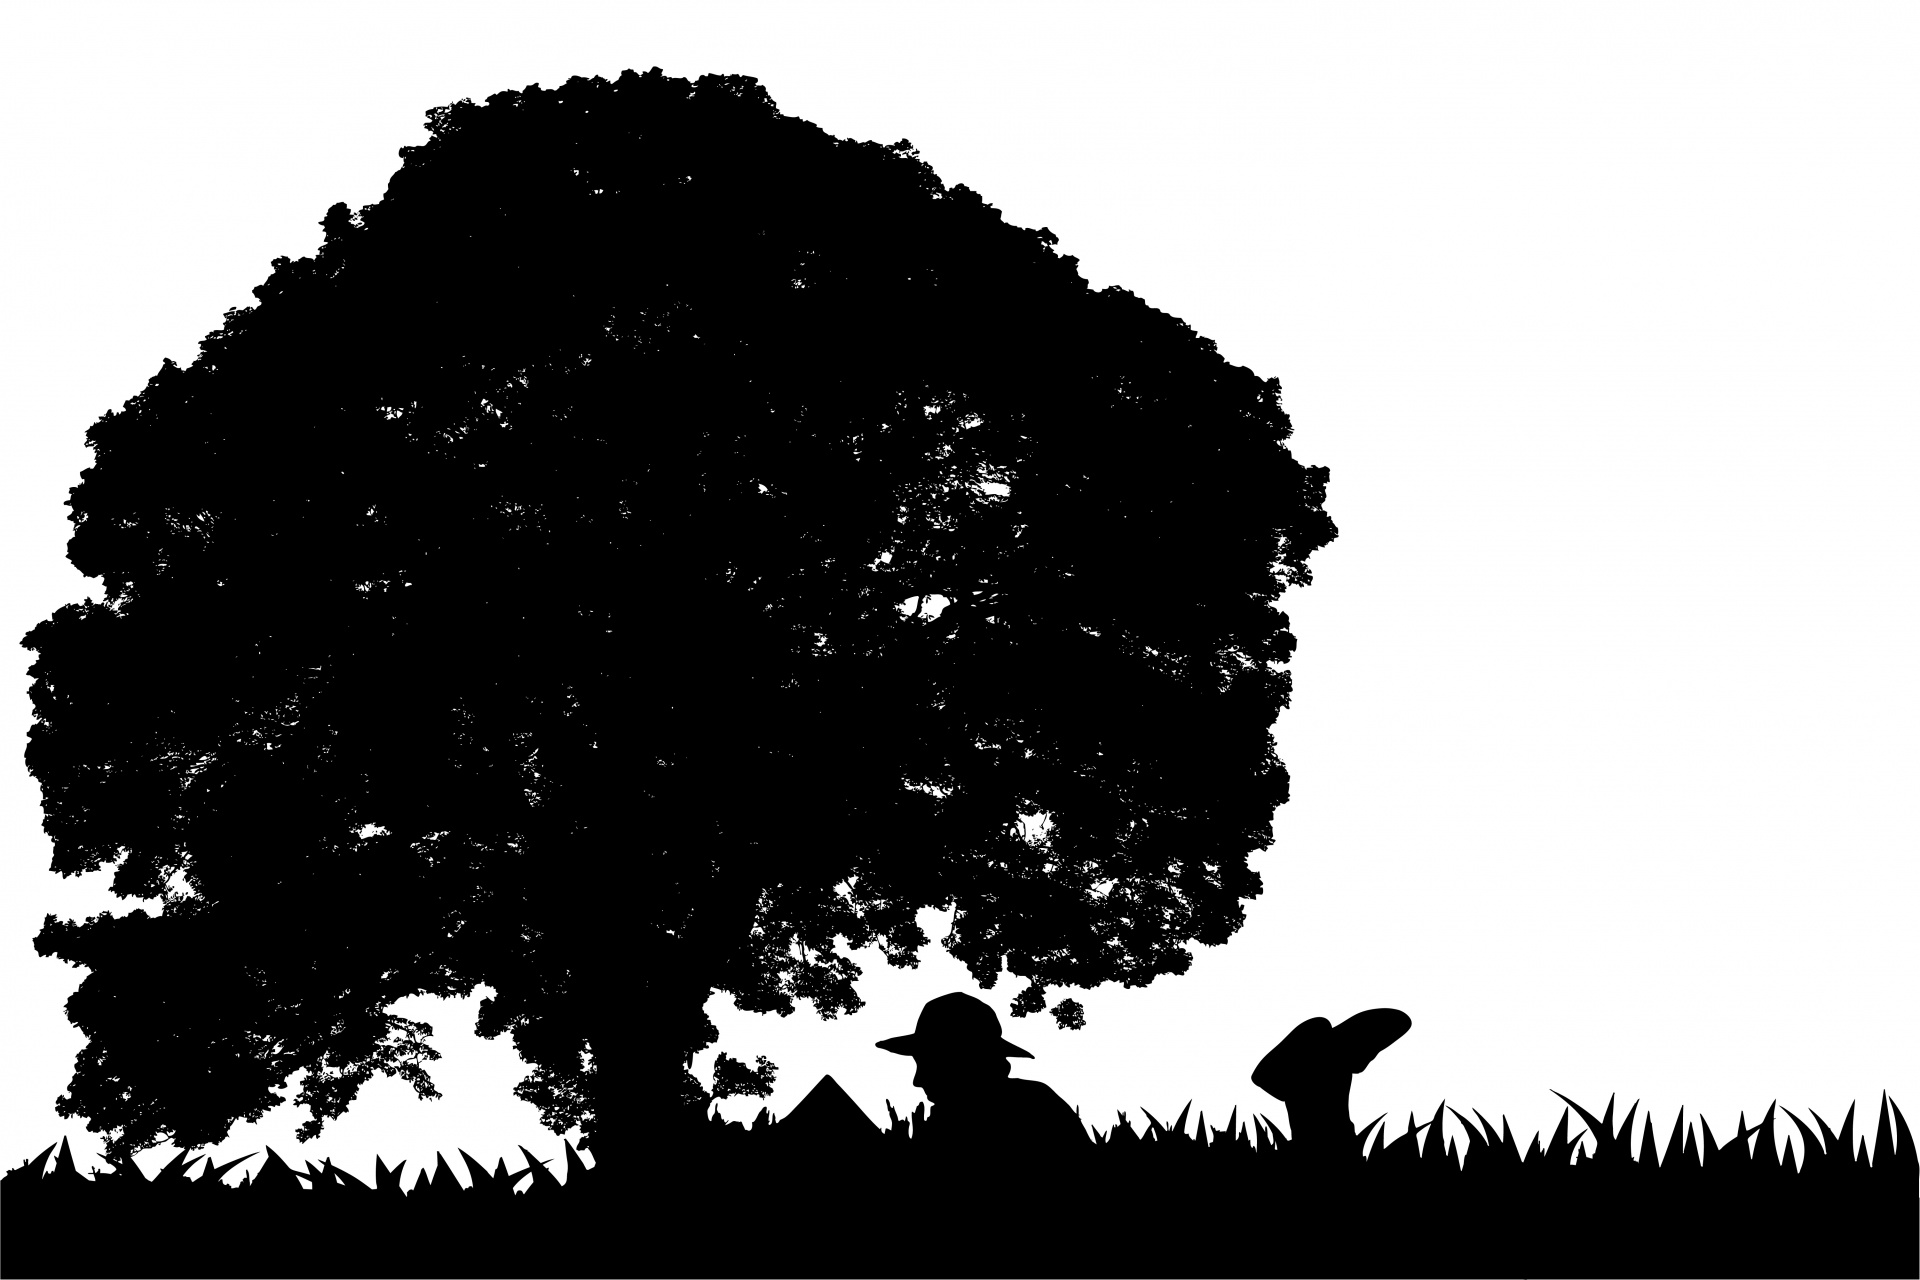 Woman laying in the long grass leading book under a tree silhouette